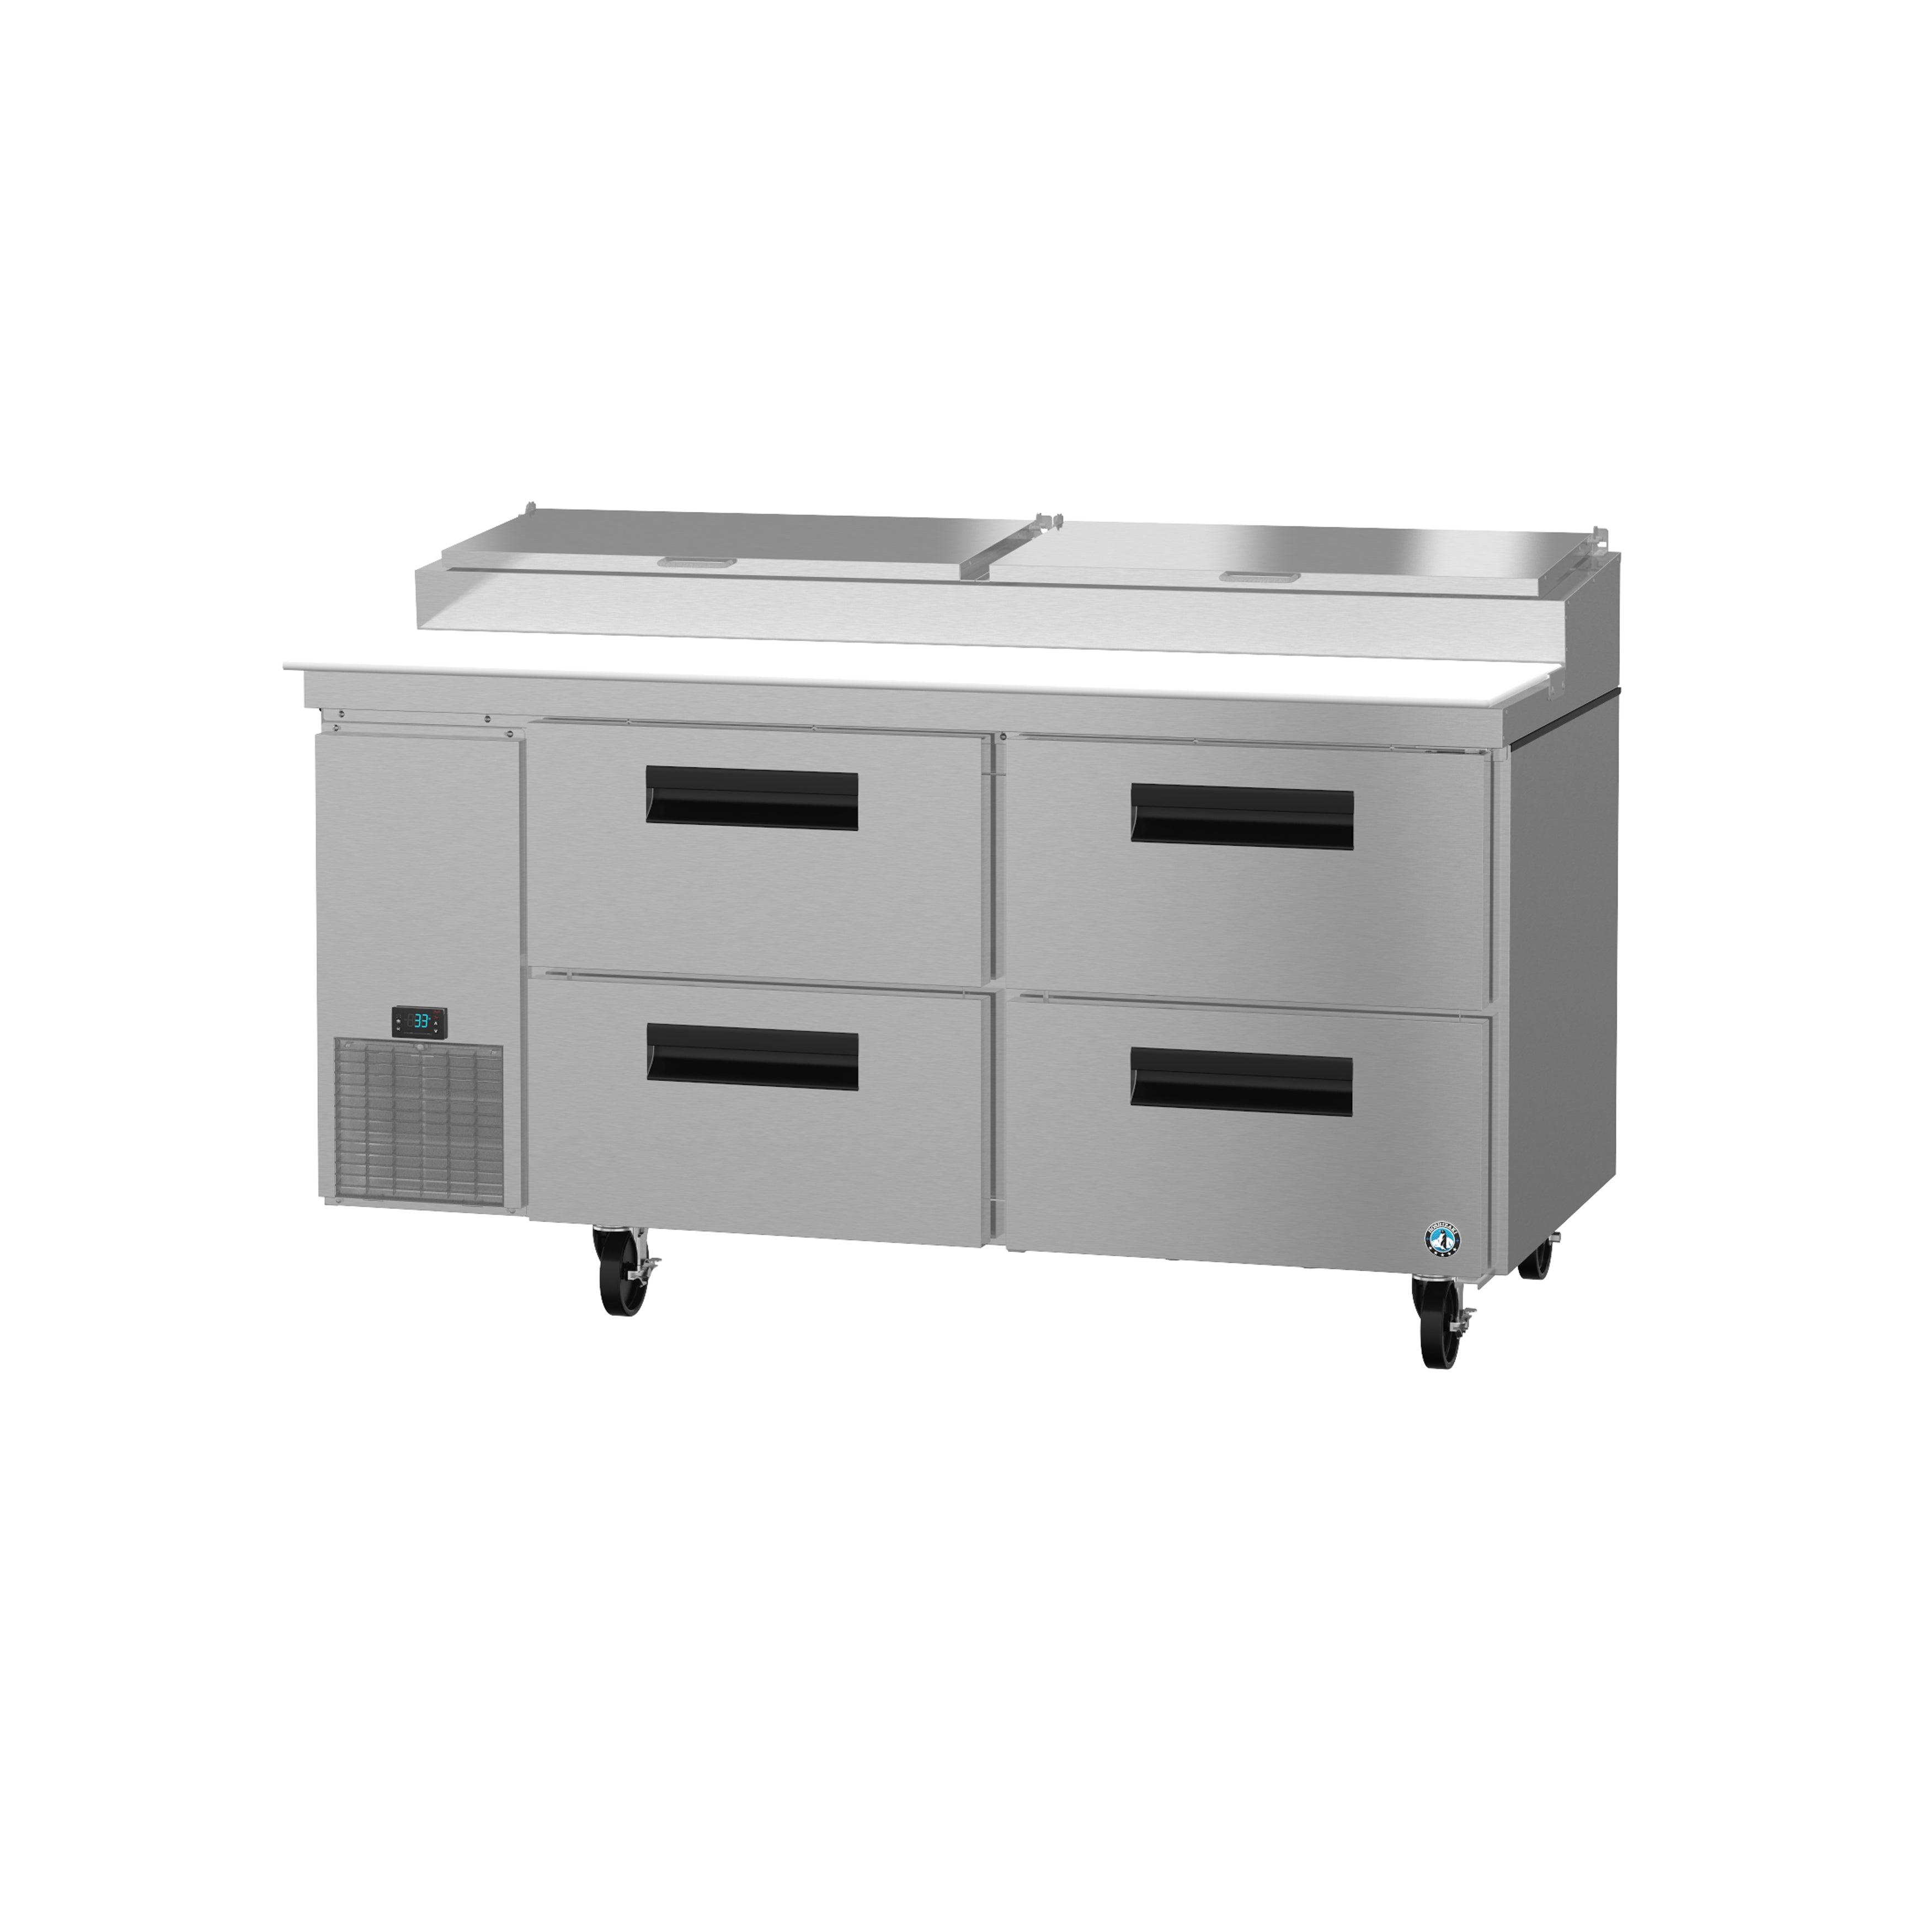 Hoshizaki - PR67A-D4, Commercial 67" Two Section Pizza Prep Table Refrigerator Stainless Drawers 19.9cu.ft.